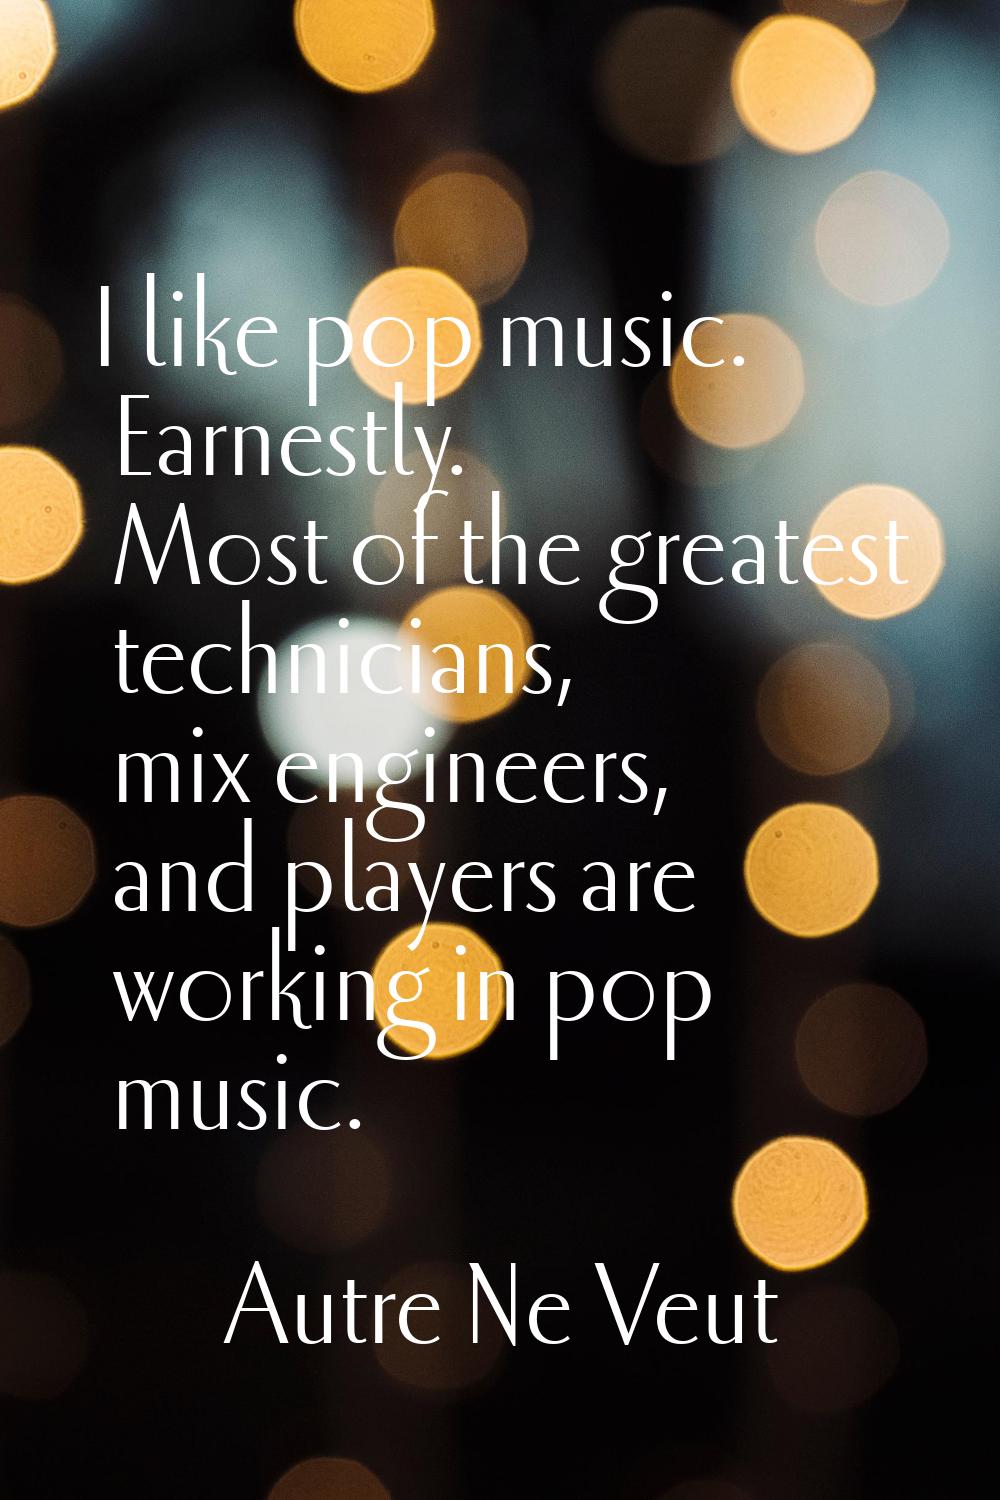 I like pop music. Earnestly. Most of the greatest technicians, mix engineers, and players are worki